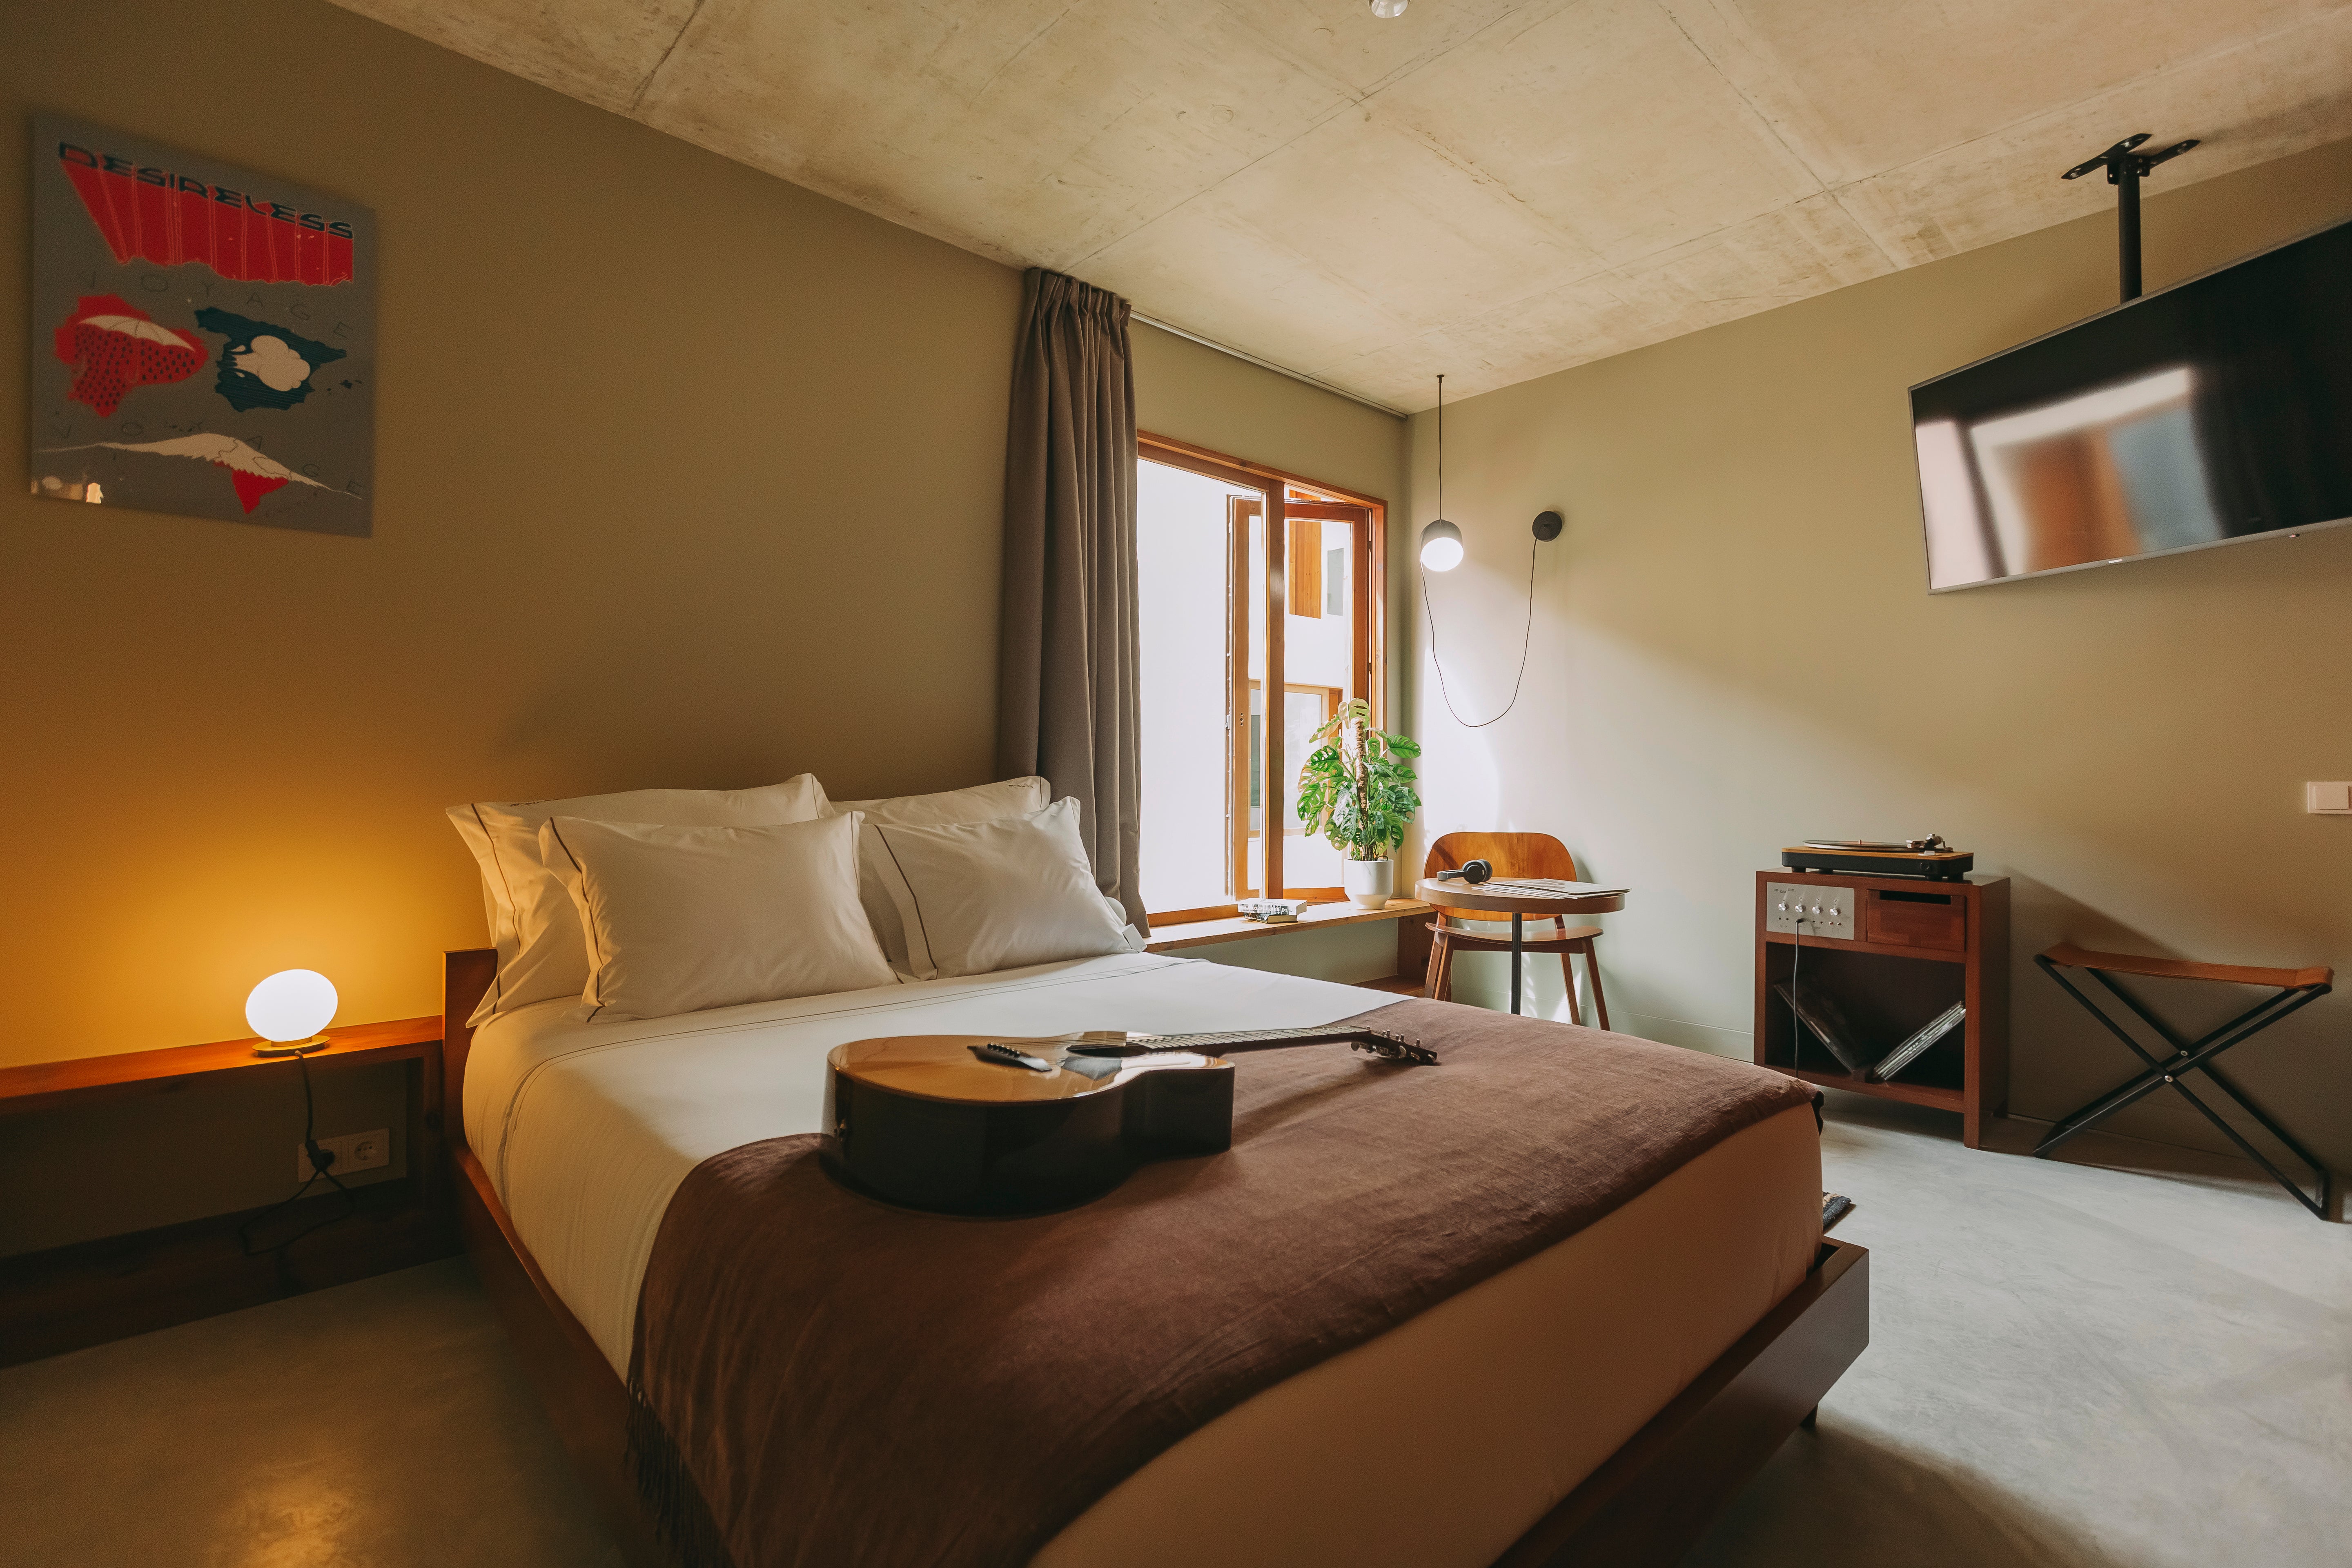 Each room can be catered with a record player and musical instruments for guest use